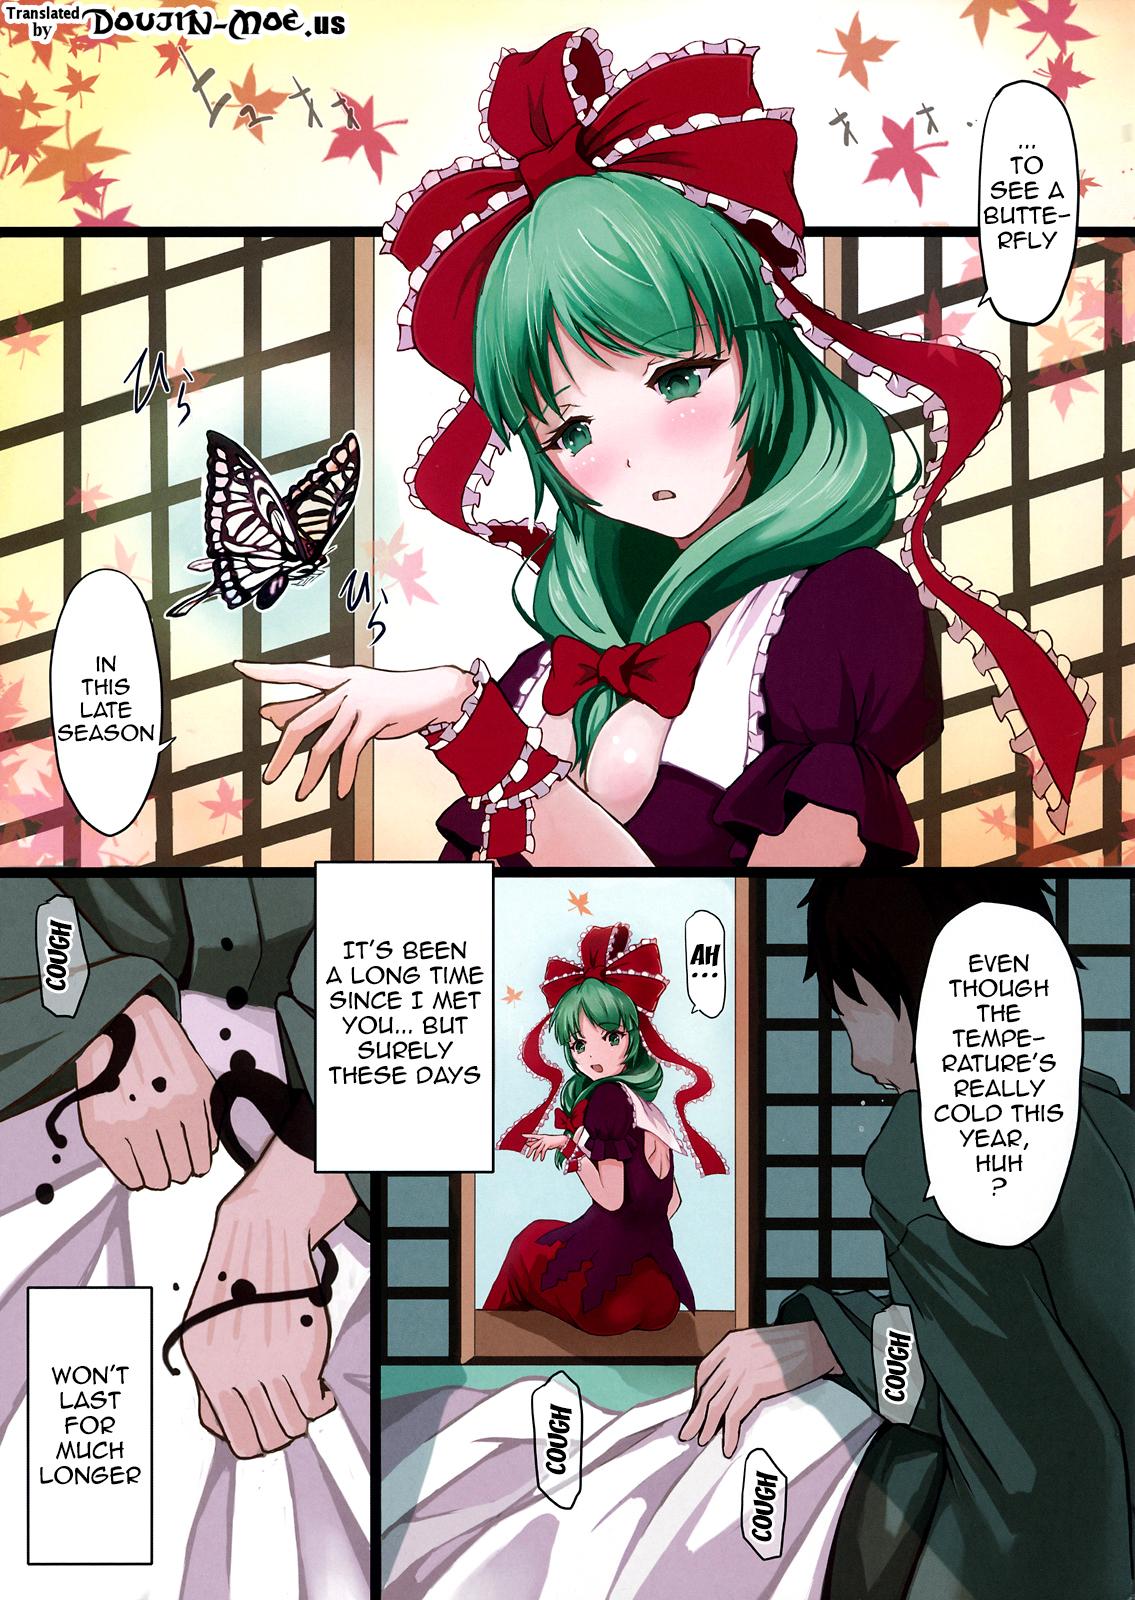 Morocha The End of Dream - Touhou project Anal Play - Page 2